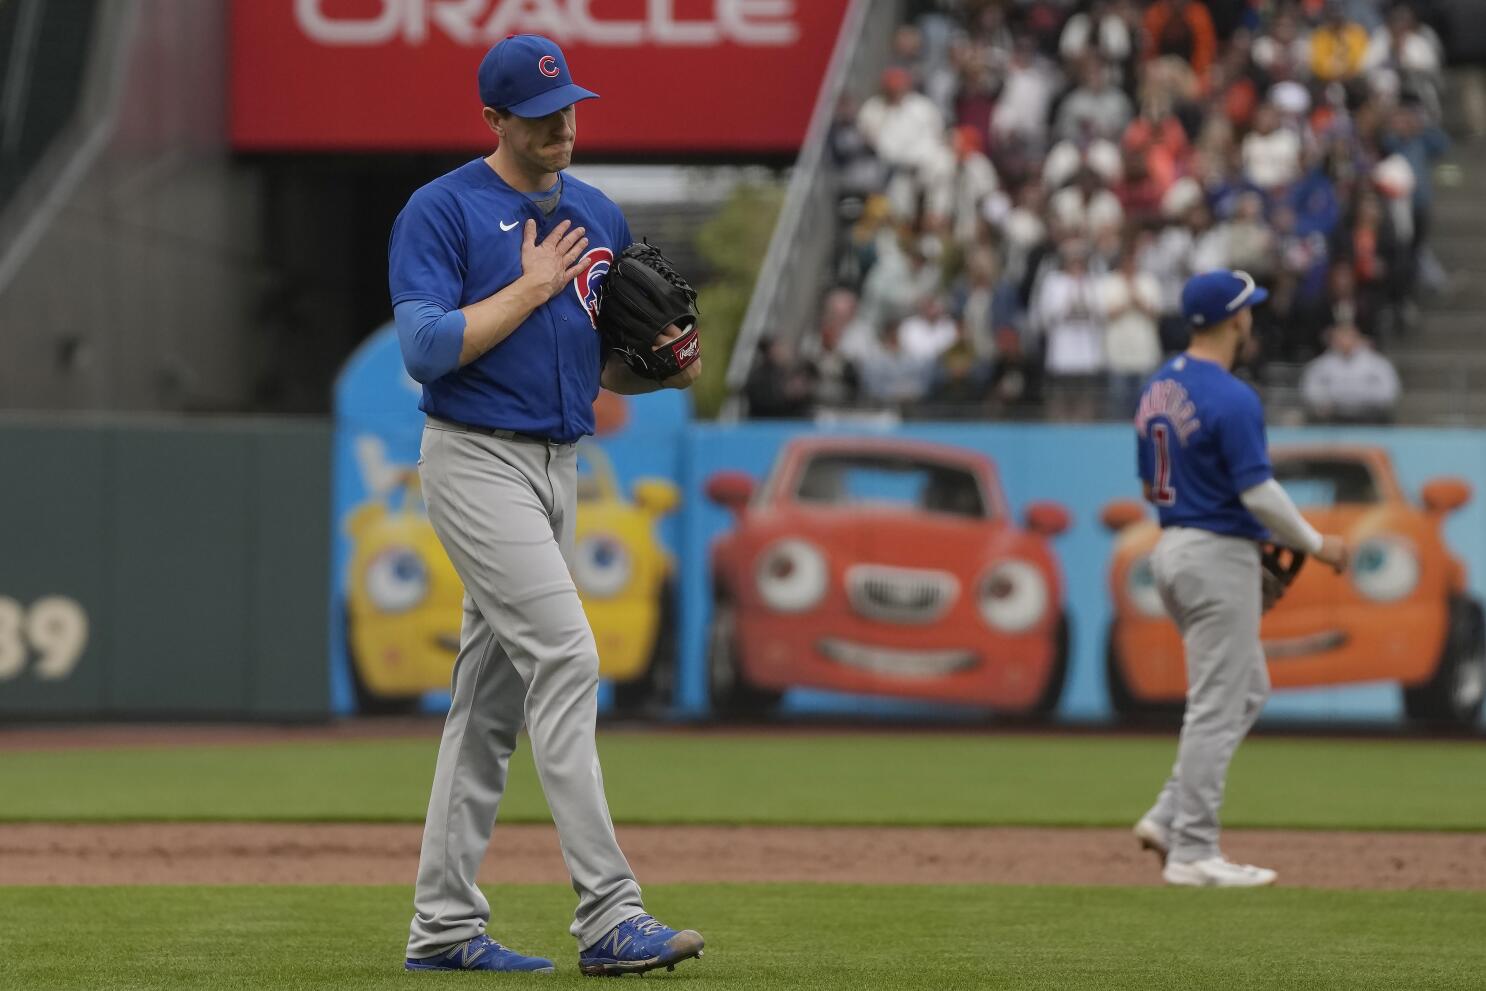 What's next for Kyle Hendricks and the Cubs? - CHGO